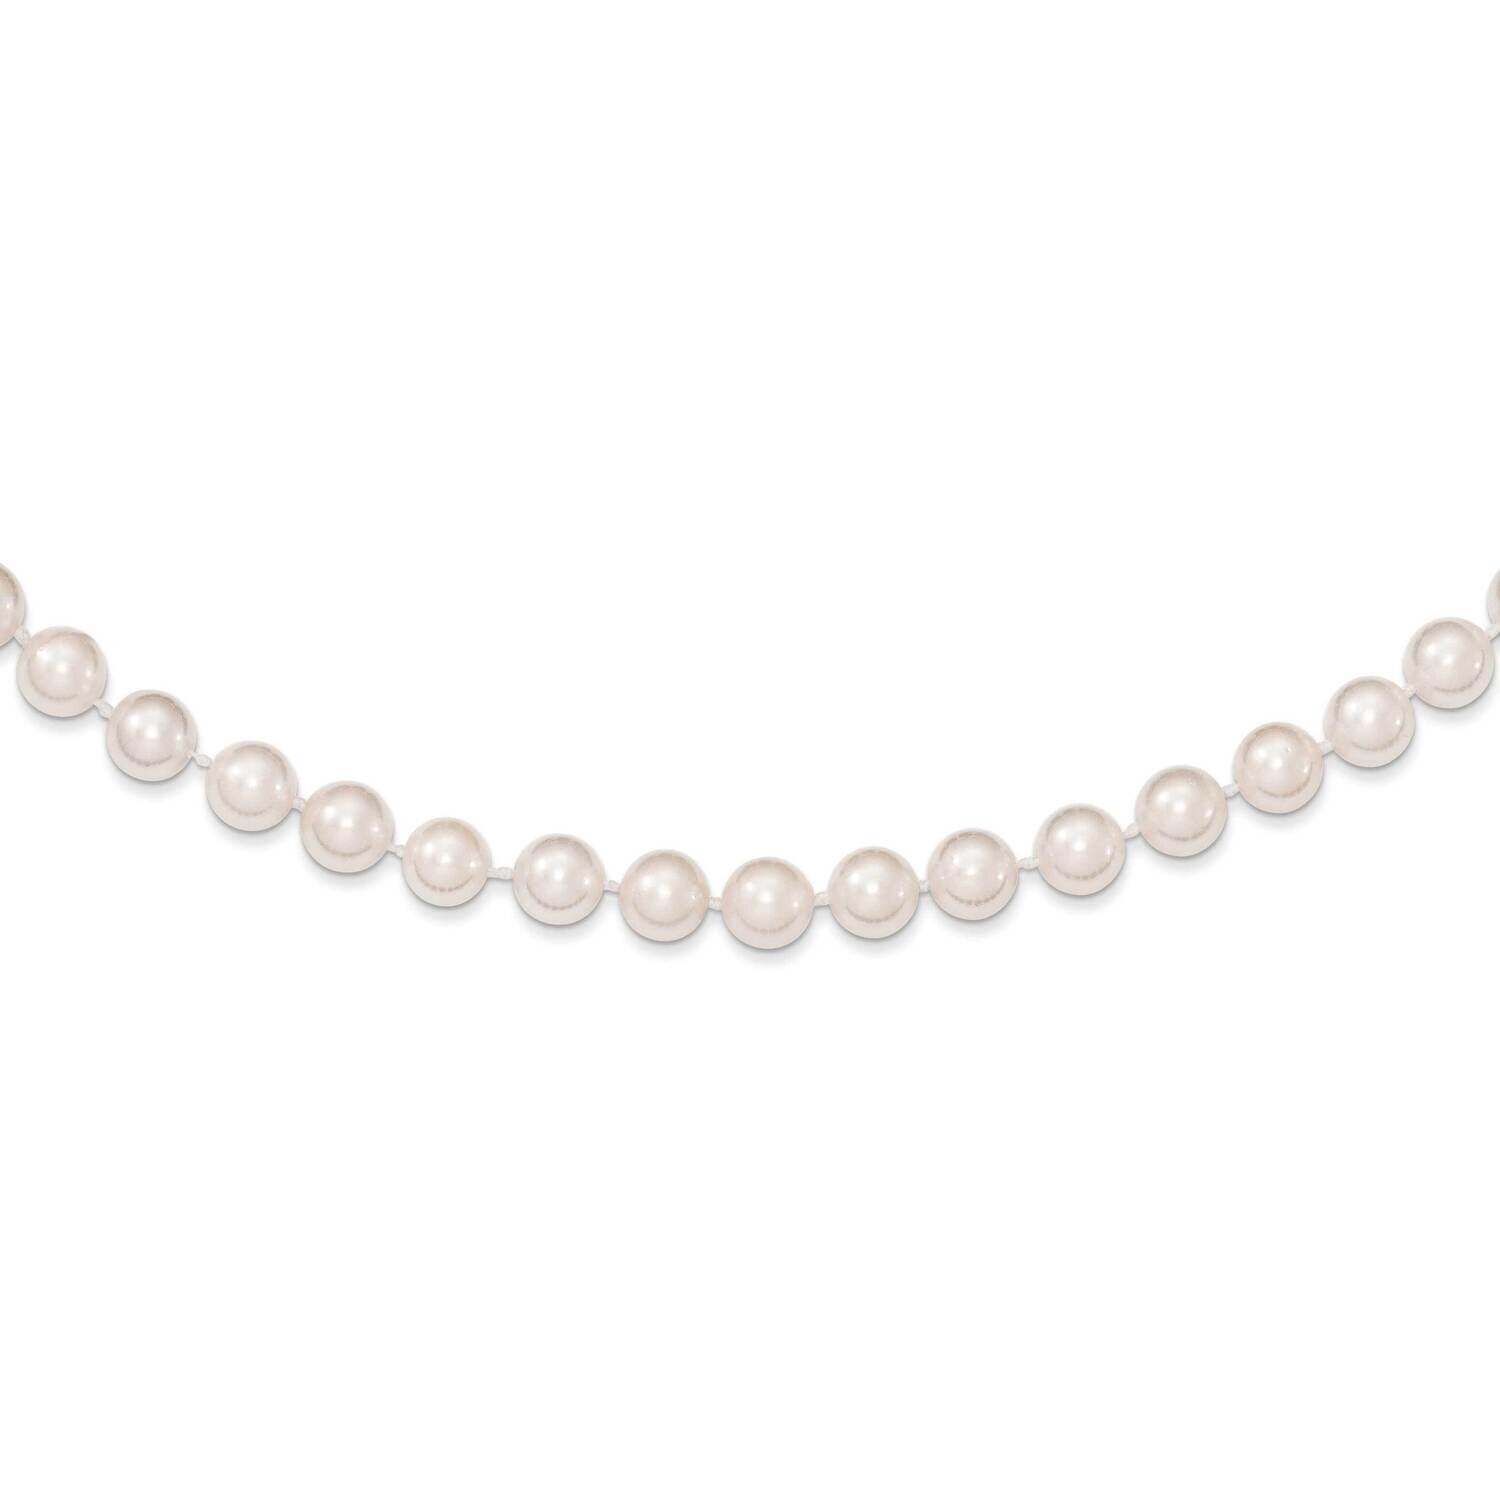 6-7mm Round White Saltwater Akoya Cultured Pearl Necklace 18 Inch 14k Gold PL60A-18